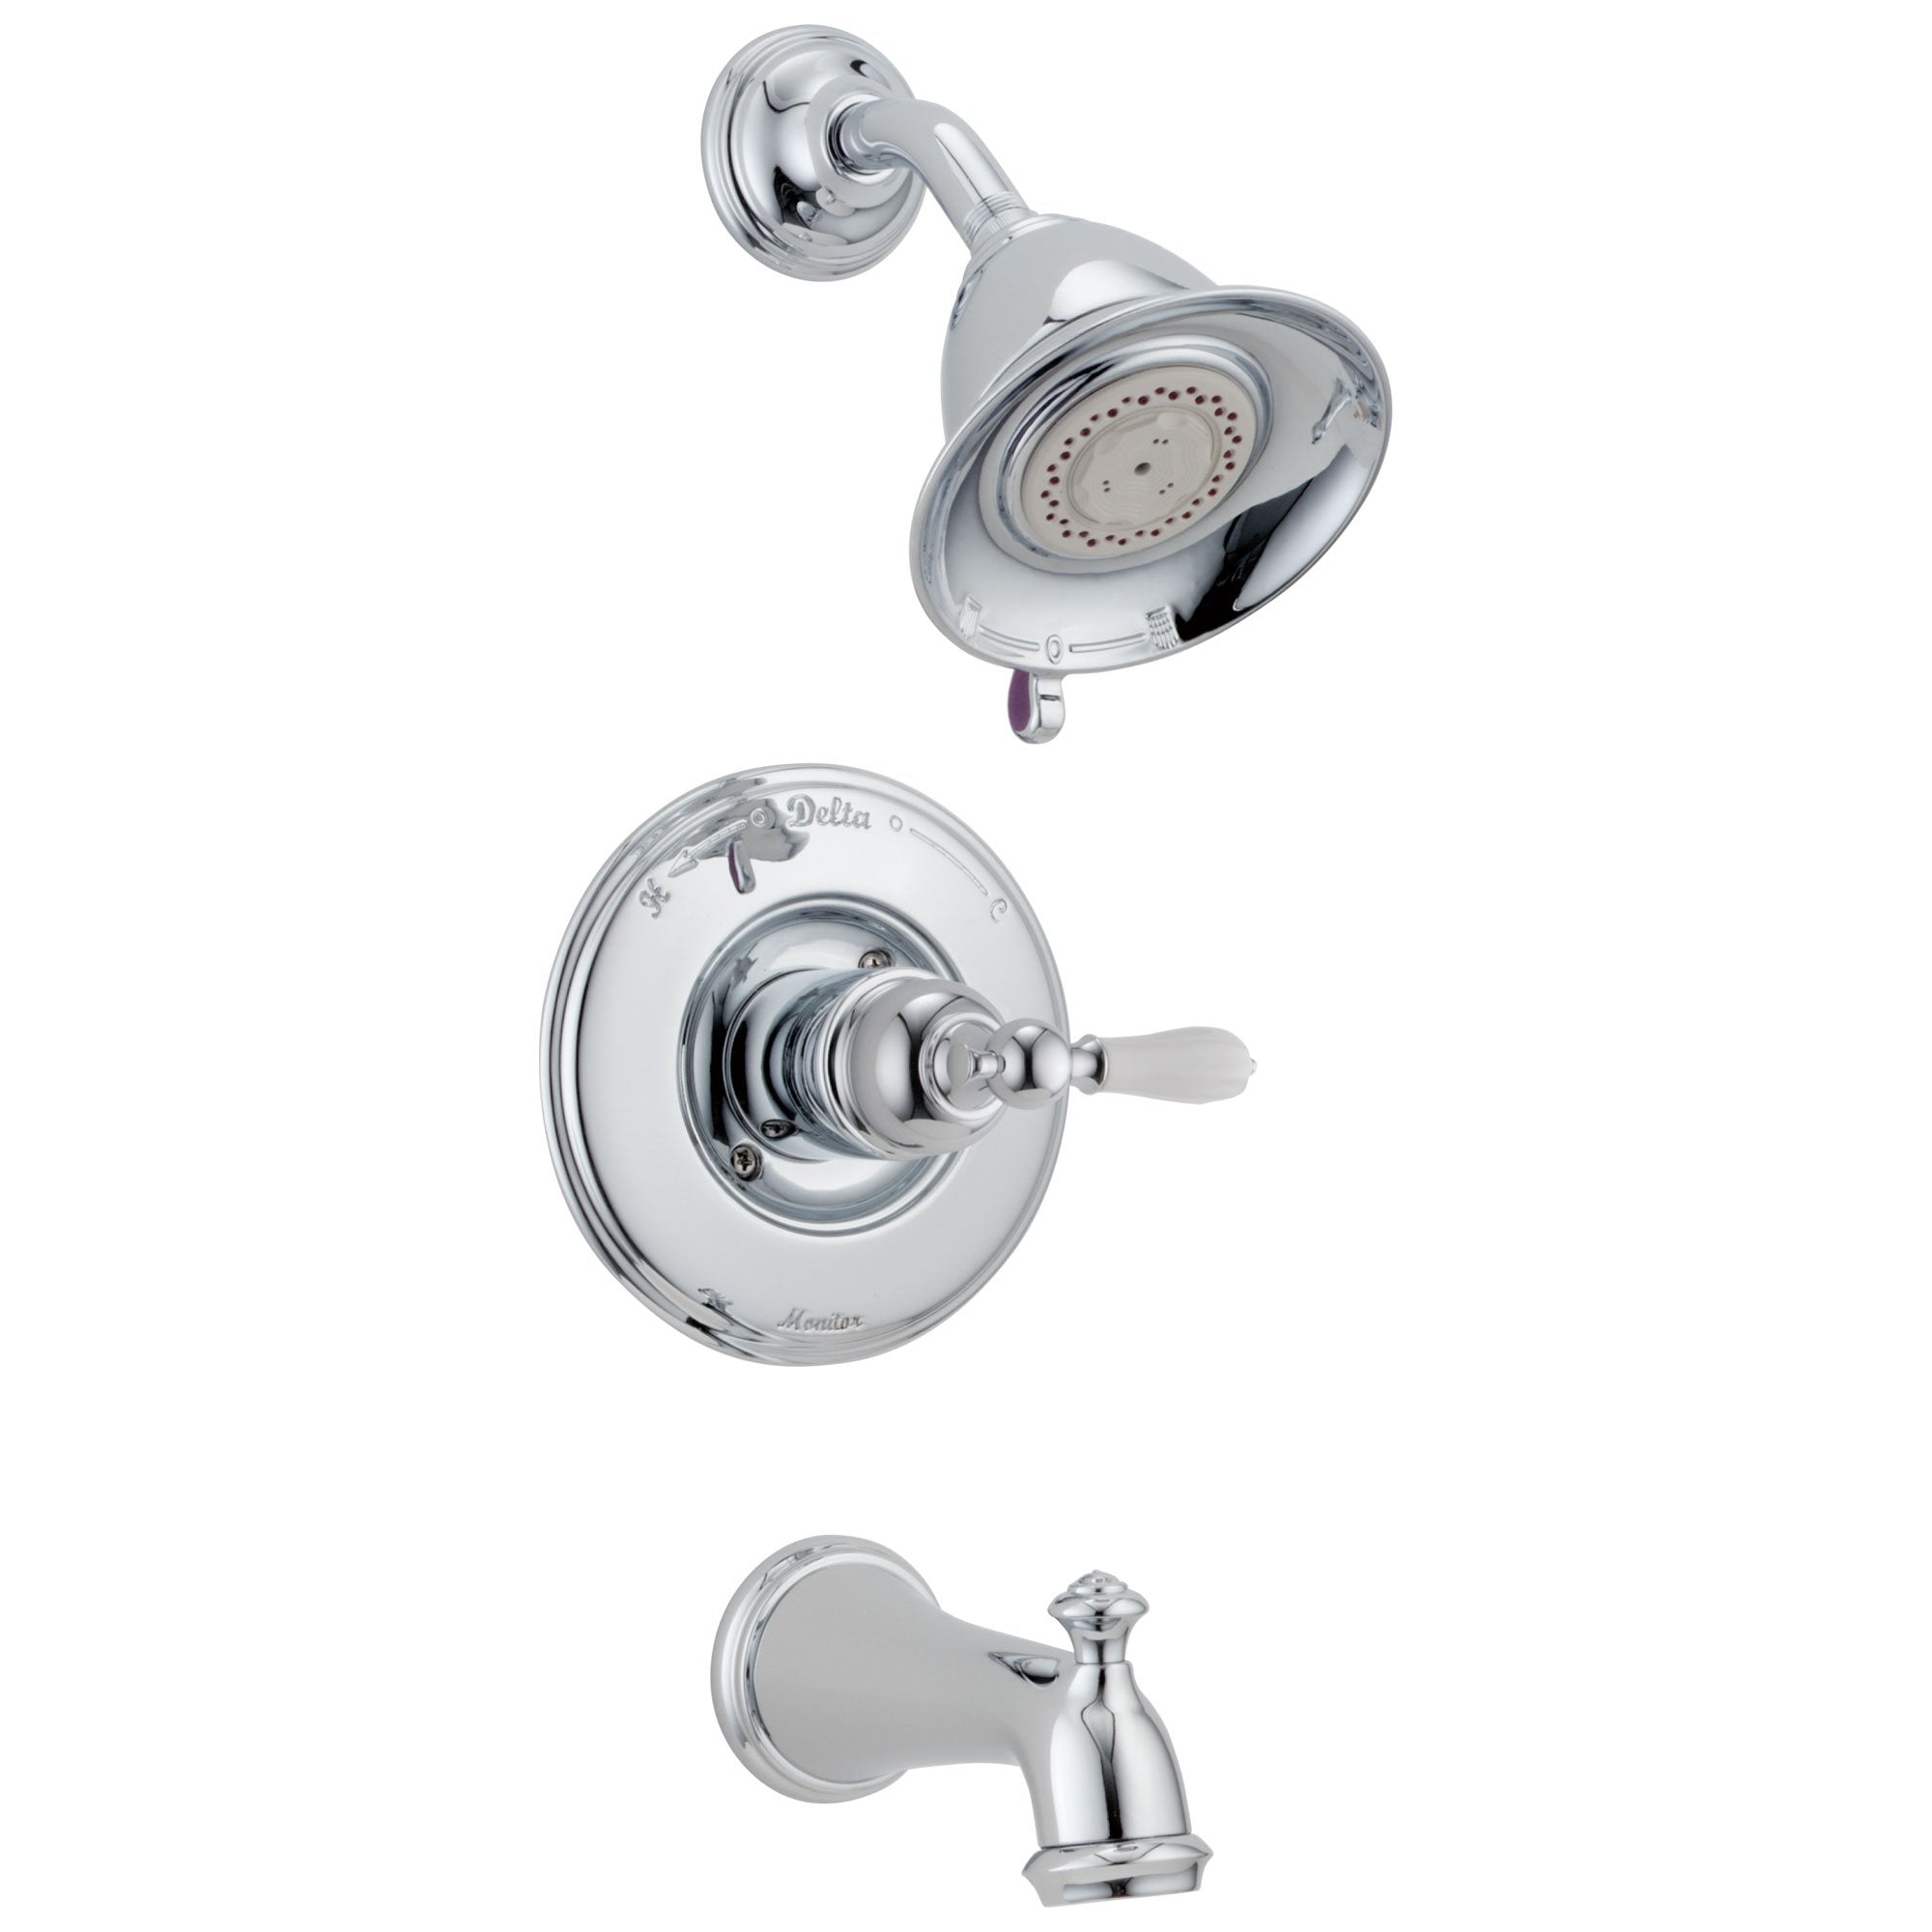 Delta Victorian Collection Chrome Finish Monitor 14 Series Tub & Shower Combo Faucet INCLUDES Single White Lever Handle and Rough-Valve with Stops D1516V